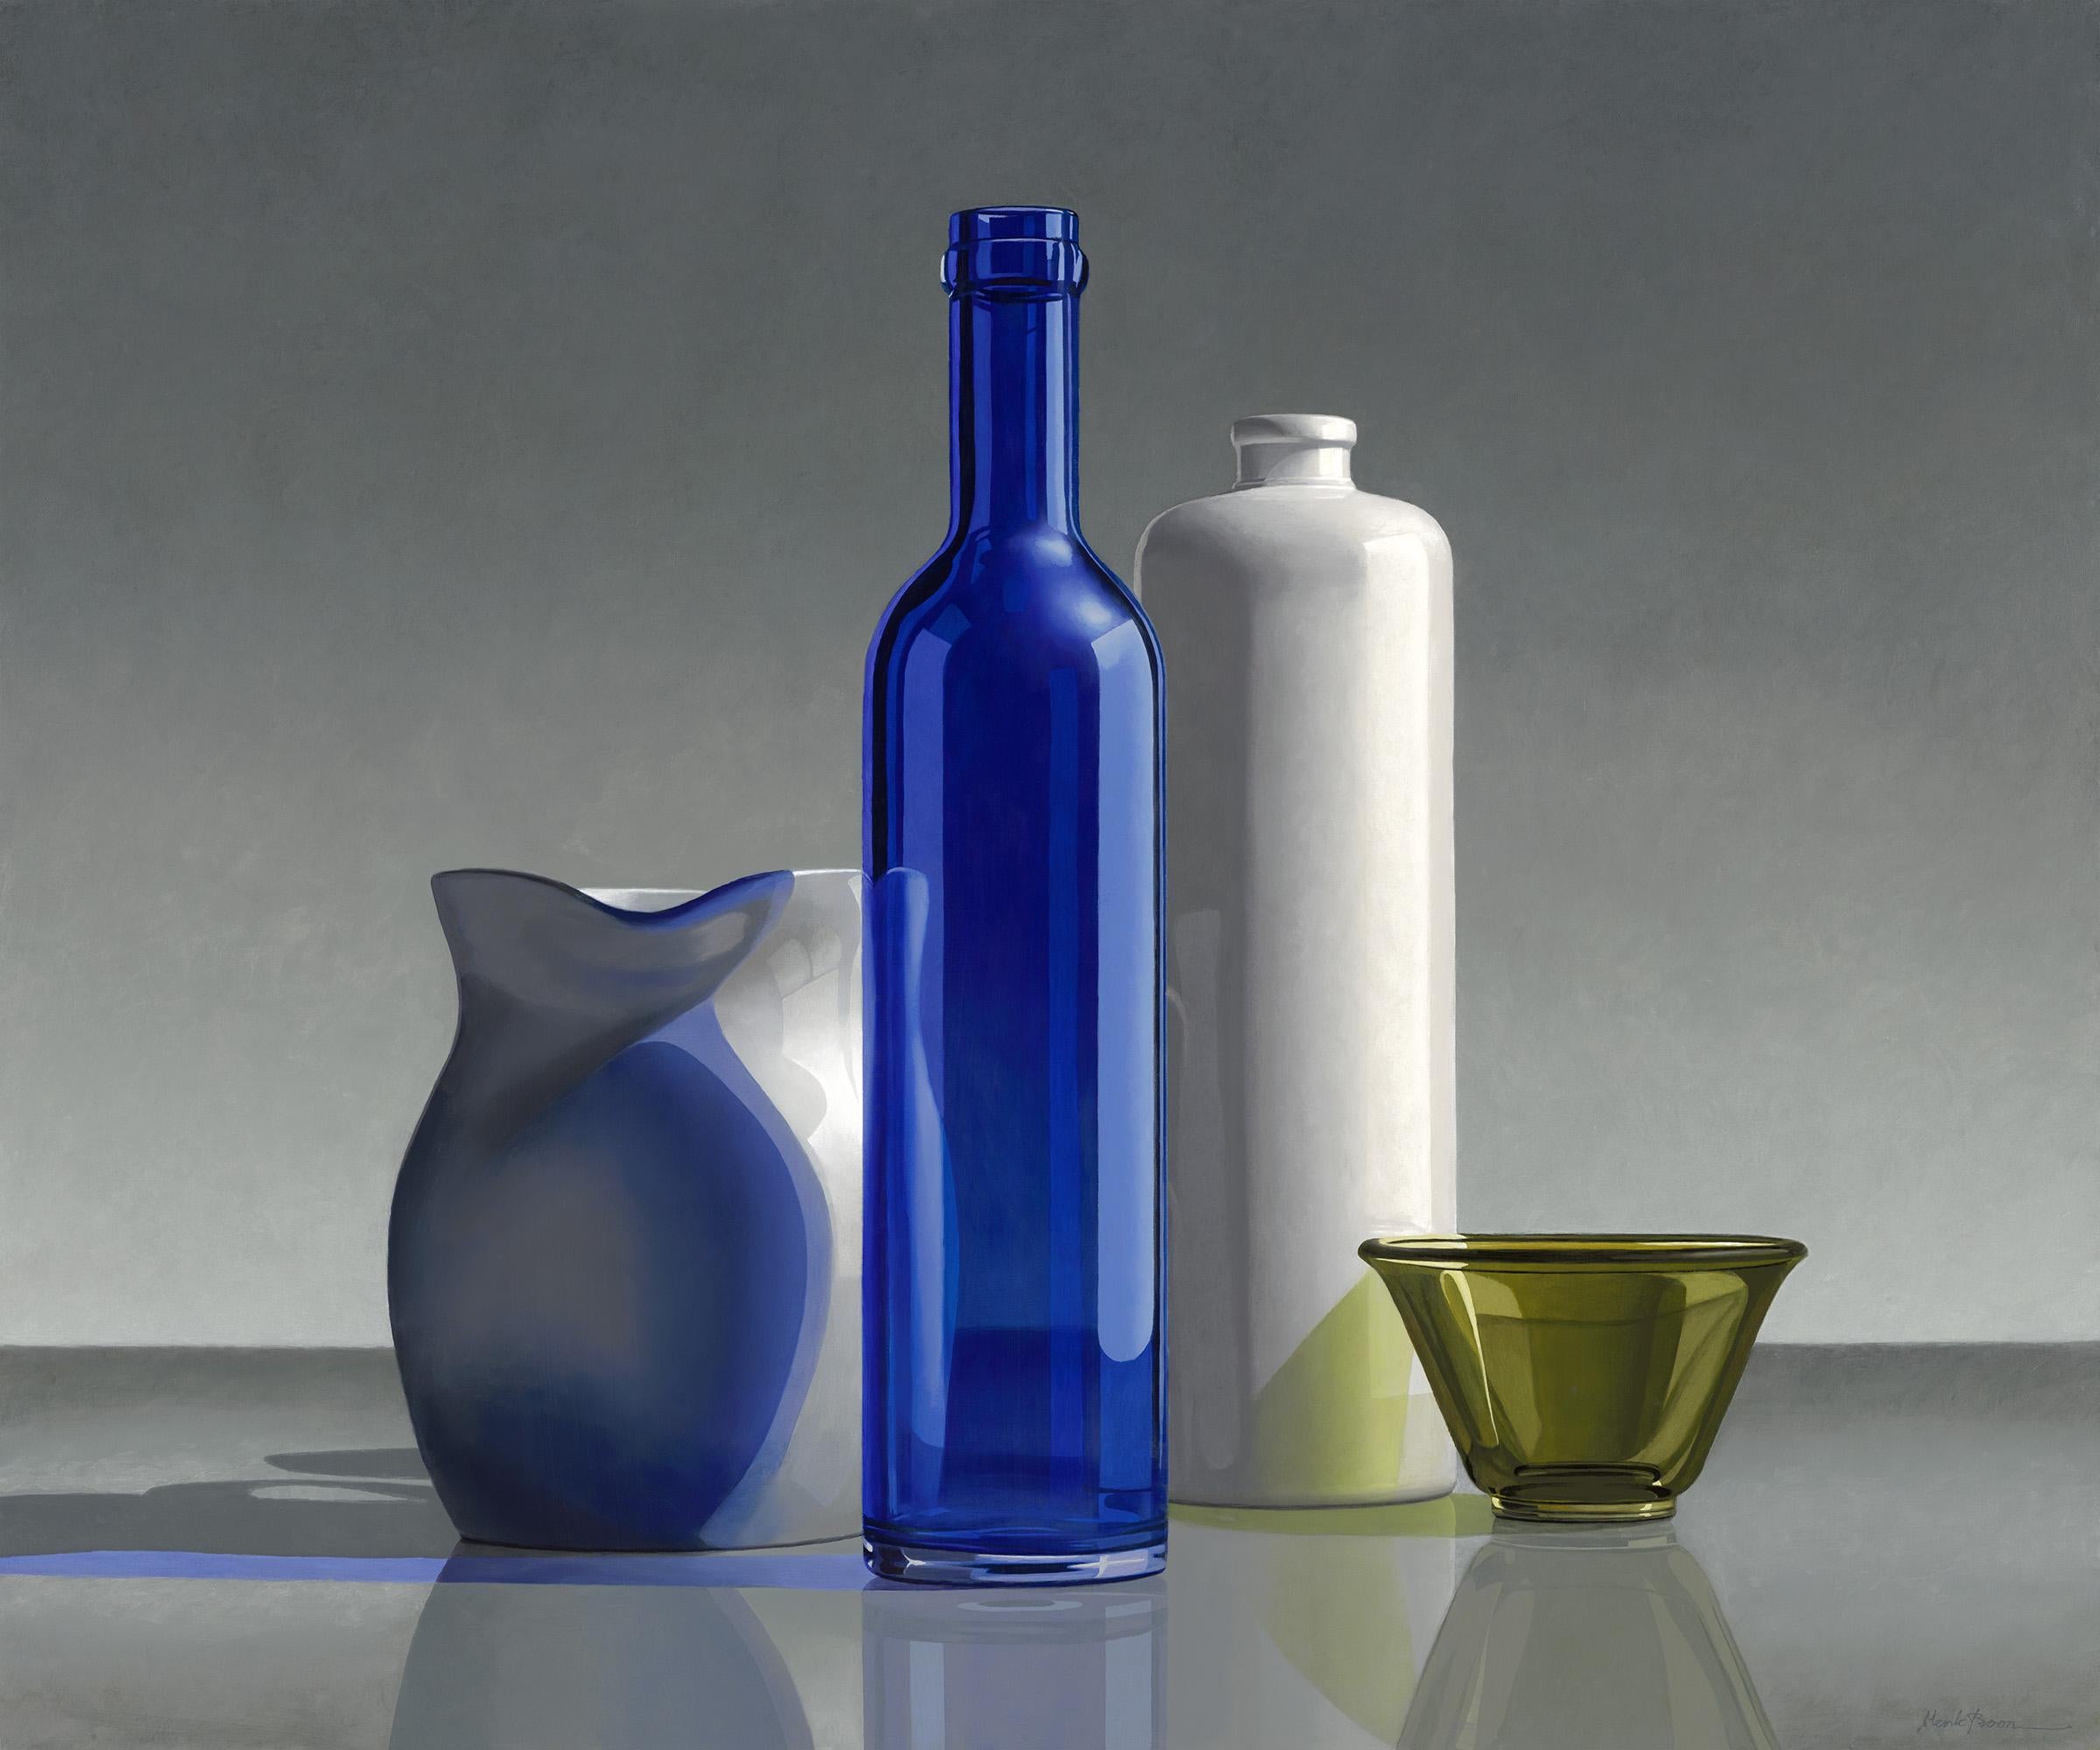 Henk Boon Figurative Painting - Composition in Blue and Green- 21st Century Dutch Realistic Still-life painting